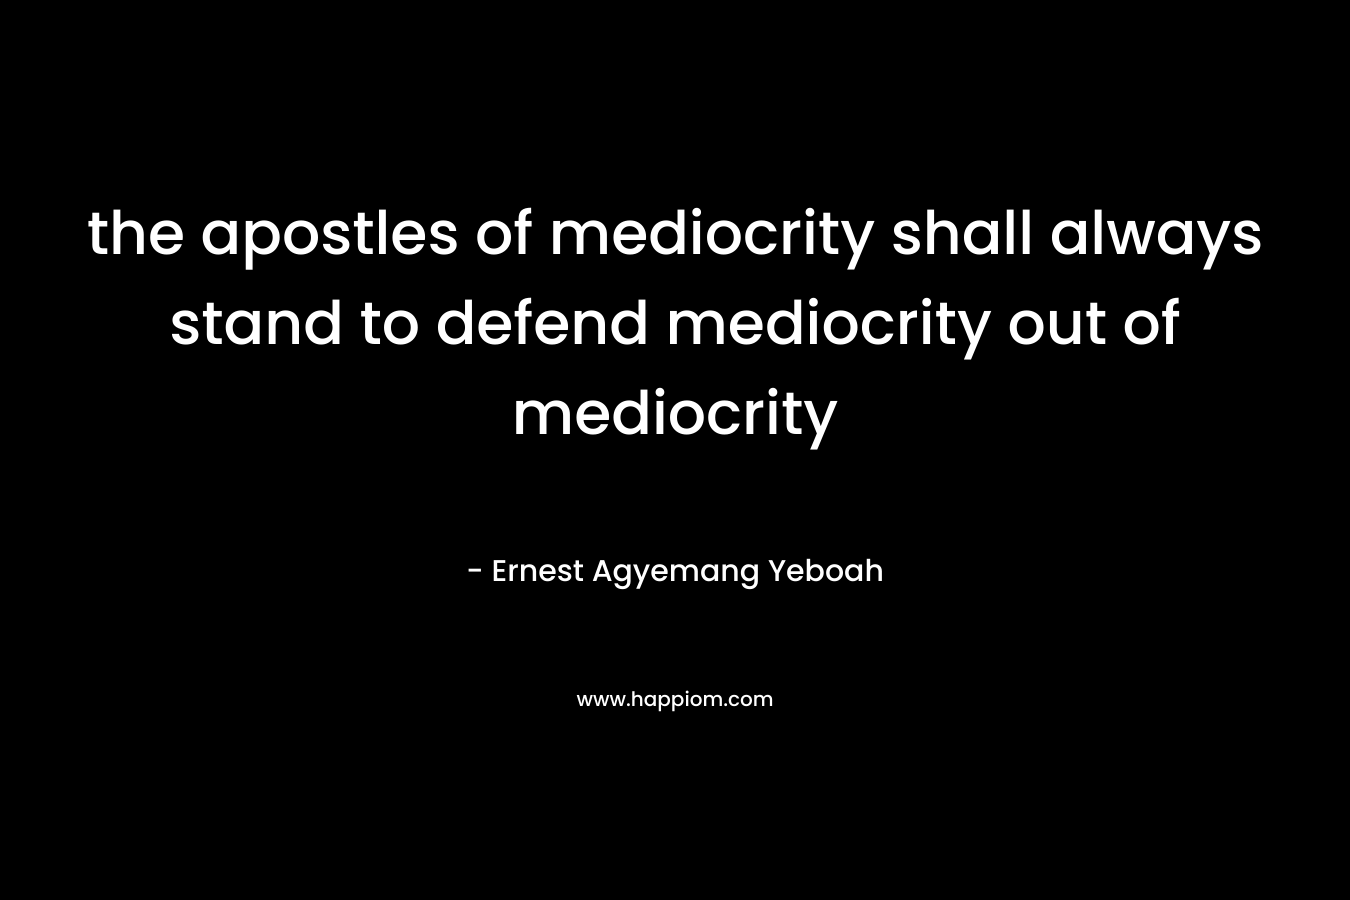 the apostles of mediocrity shall always stand to defend mediocrity out of mediocrity